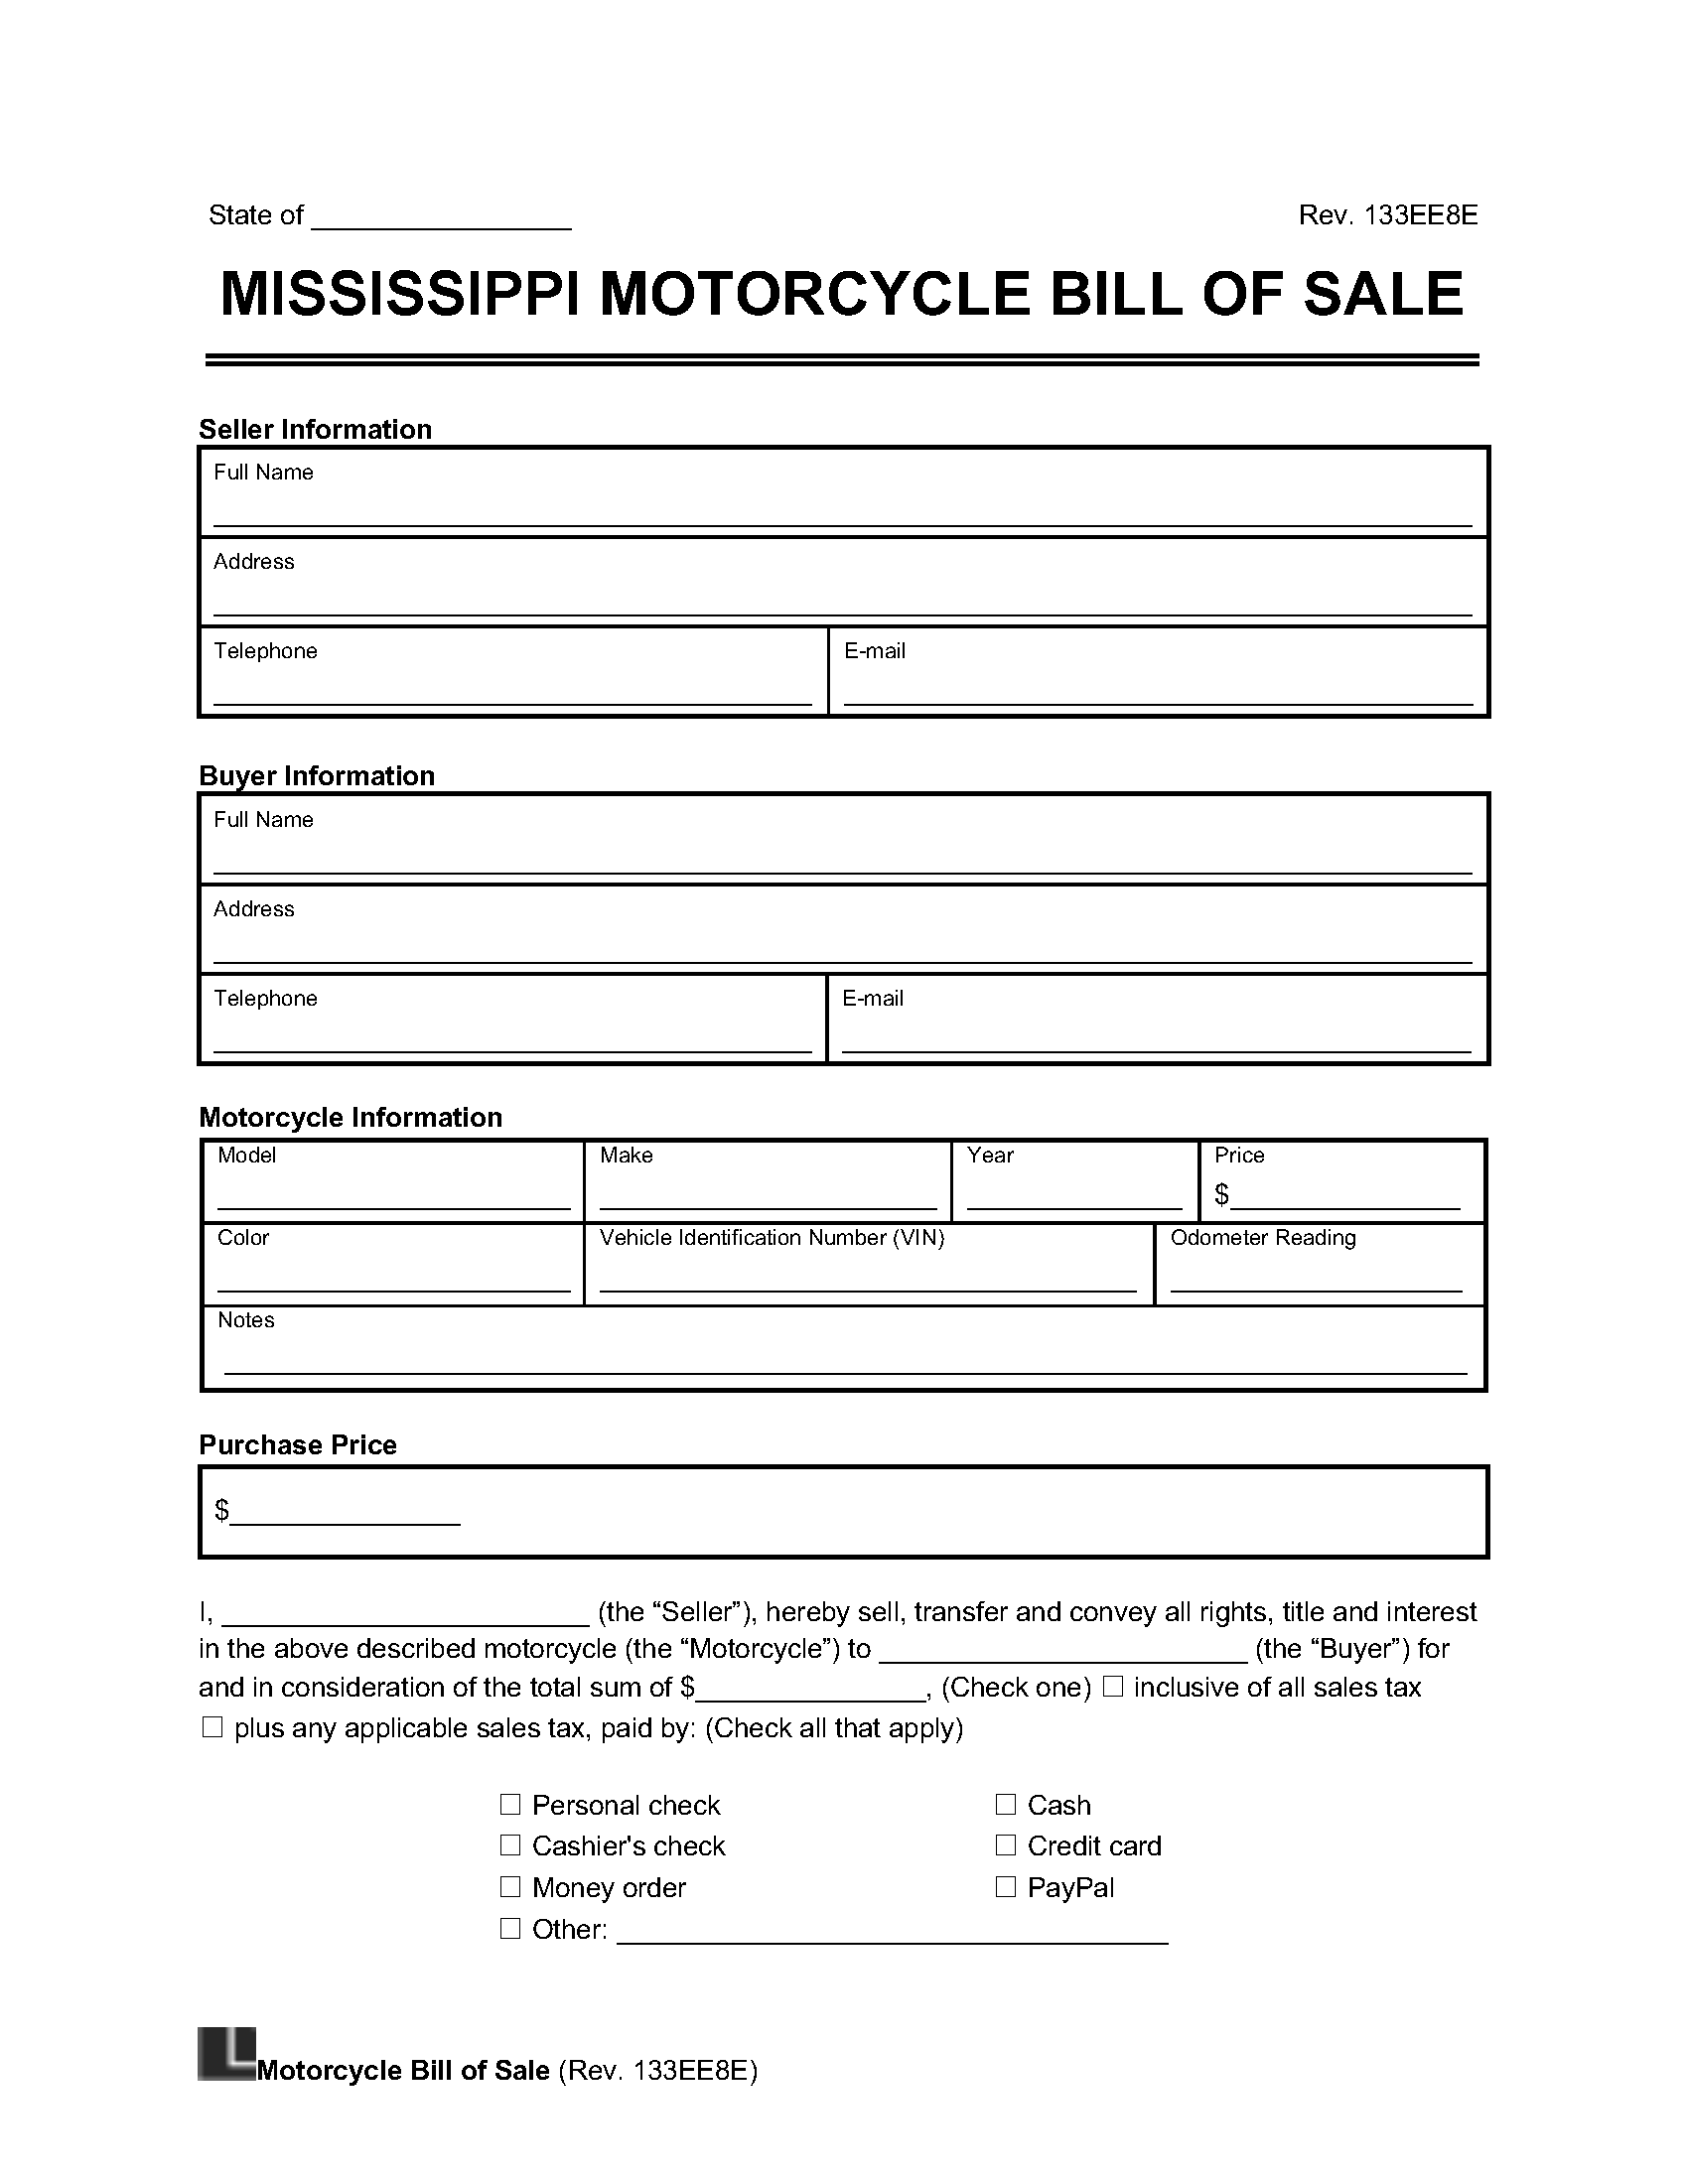 mississippi motorcycle bill of sale